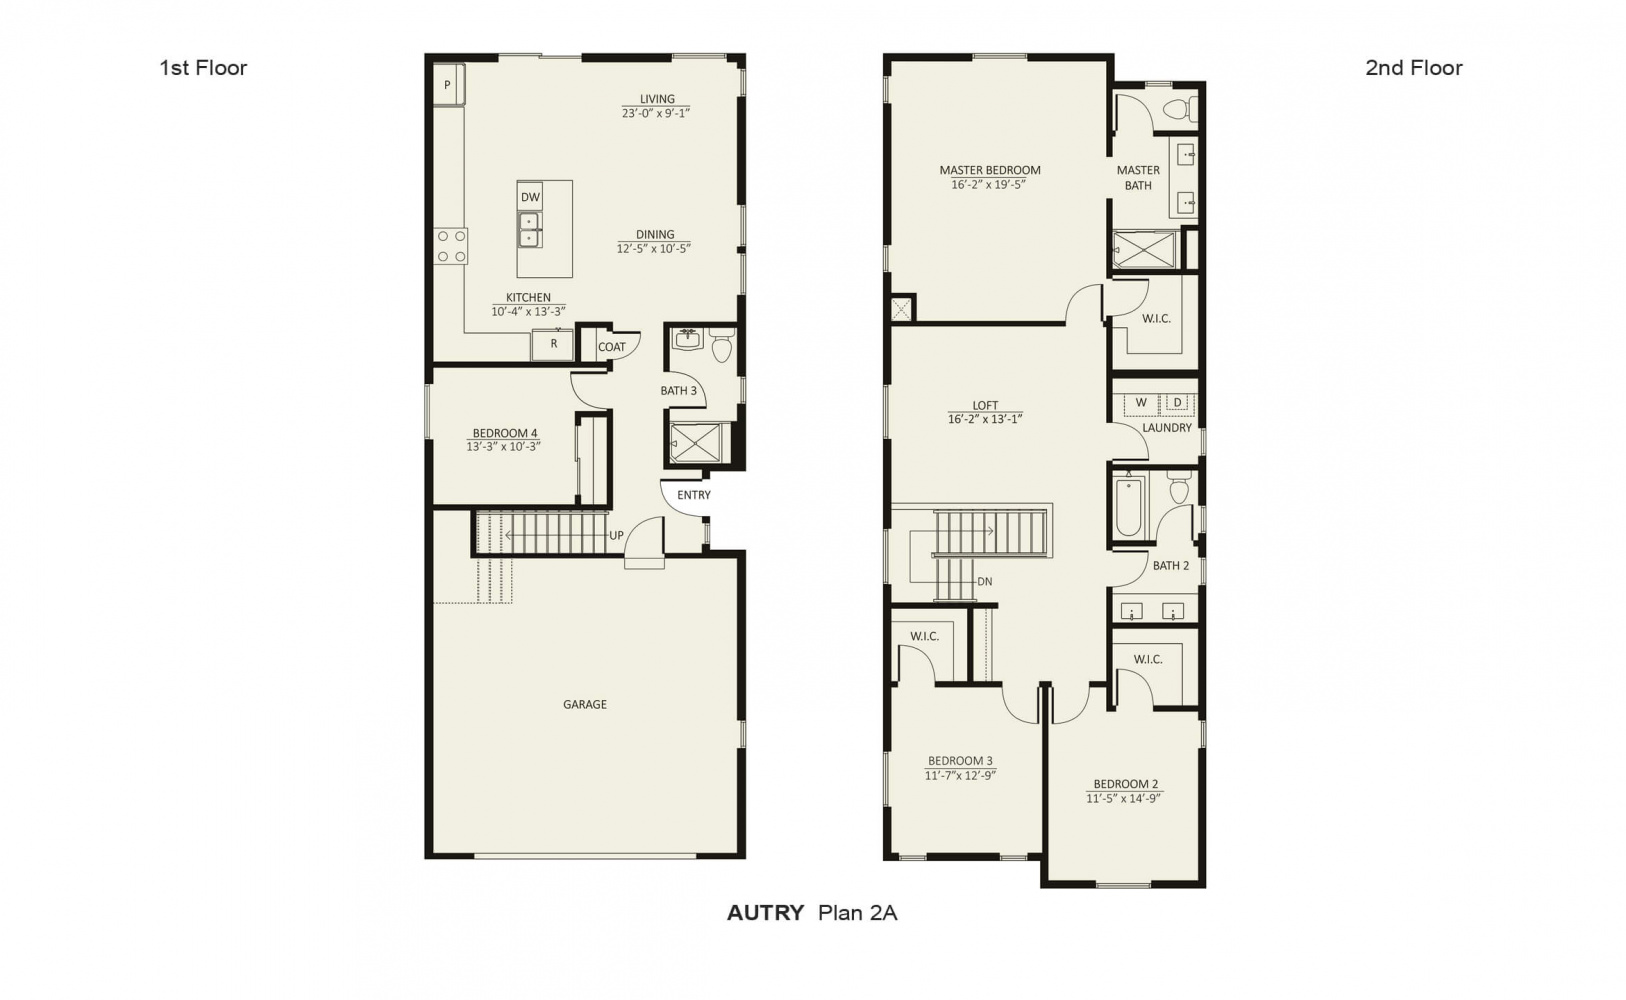 Plan 2A Floorplan of Autry New Homes in Sylmar, CA